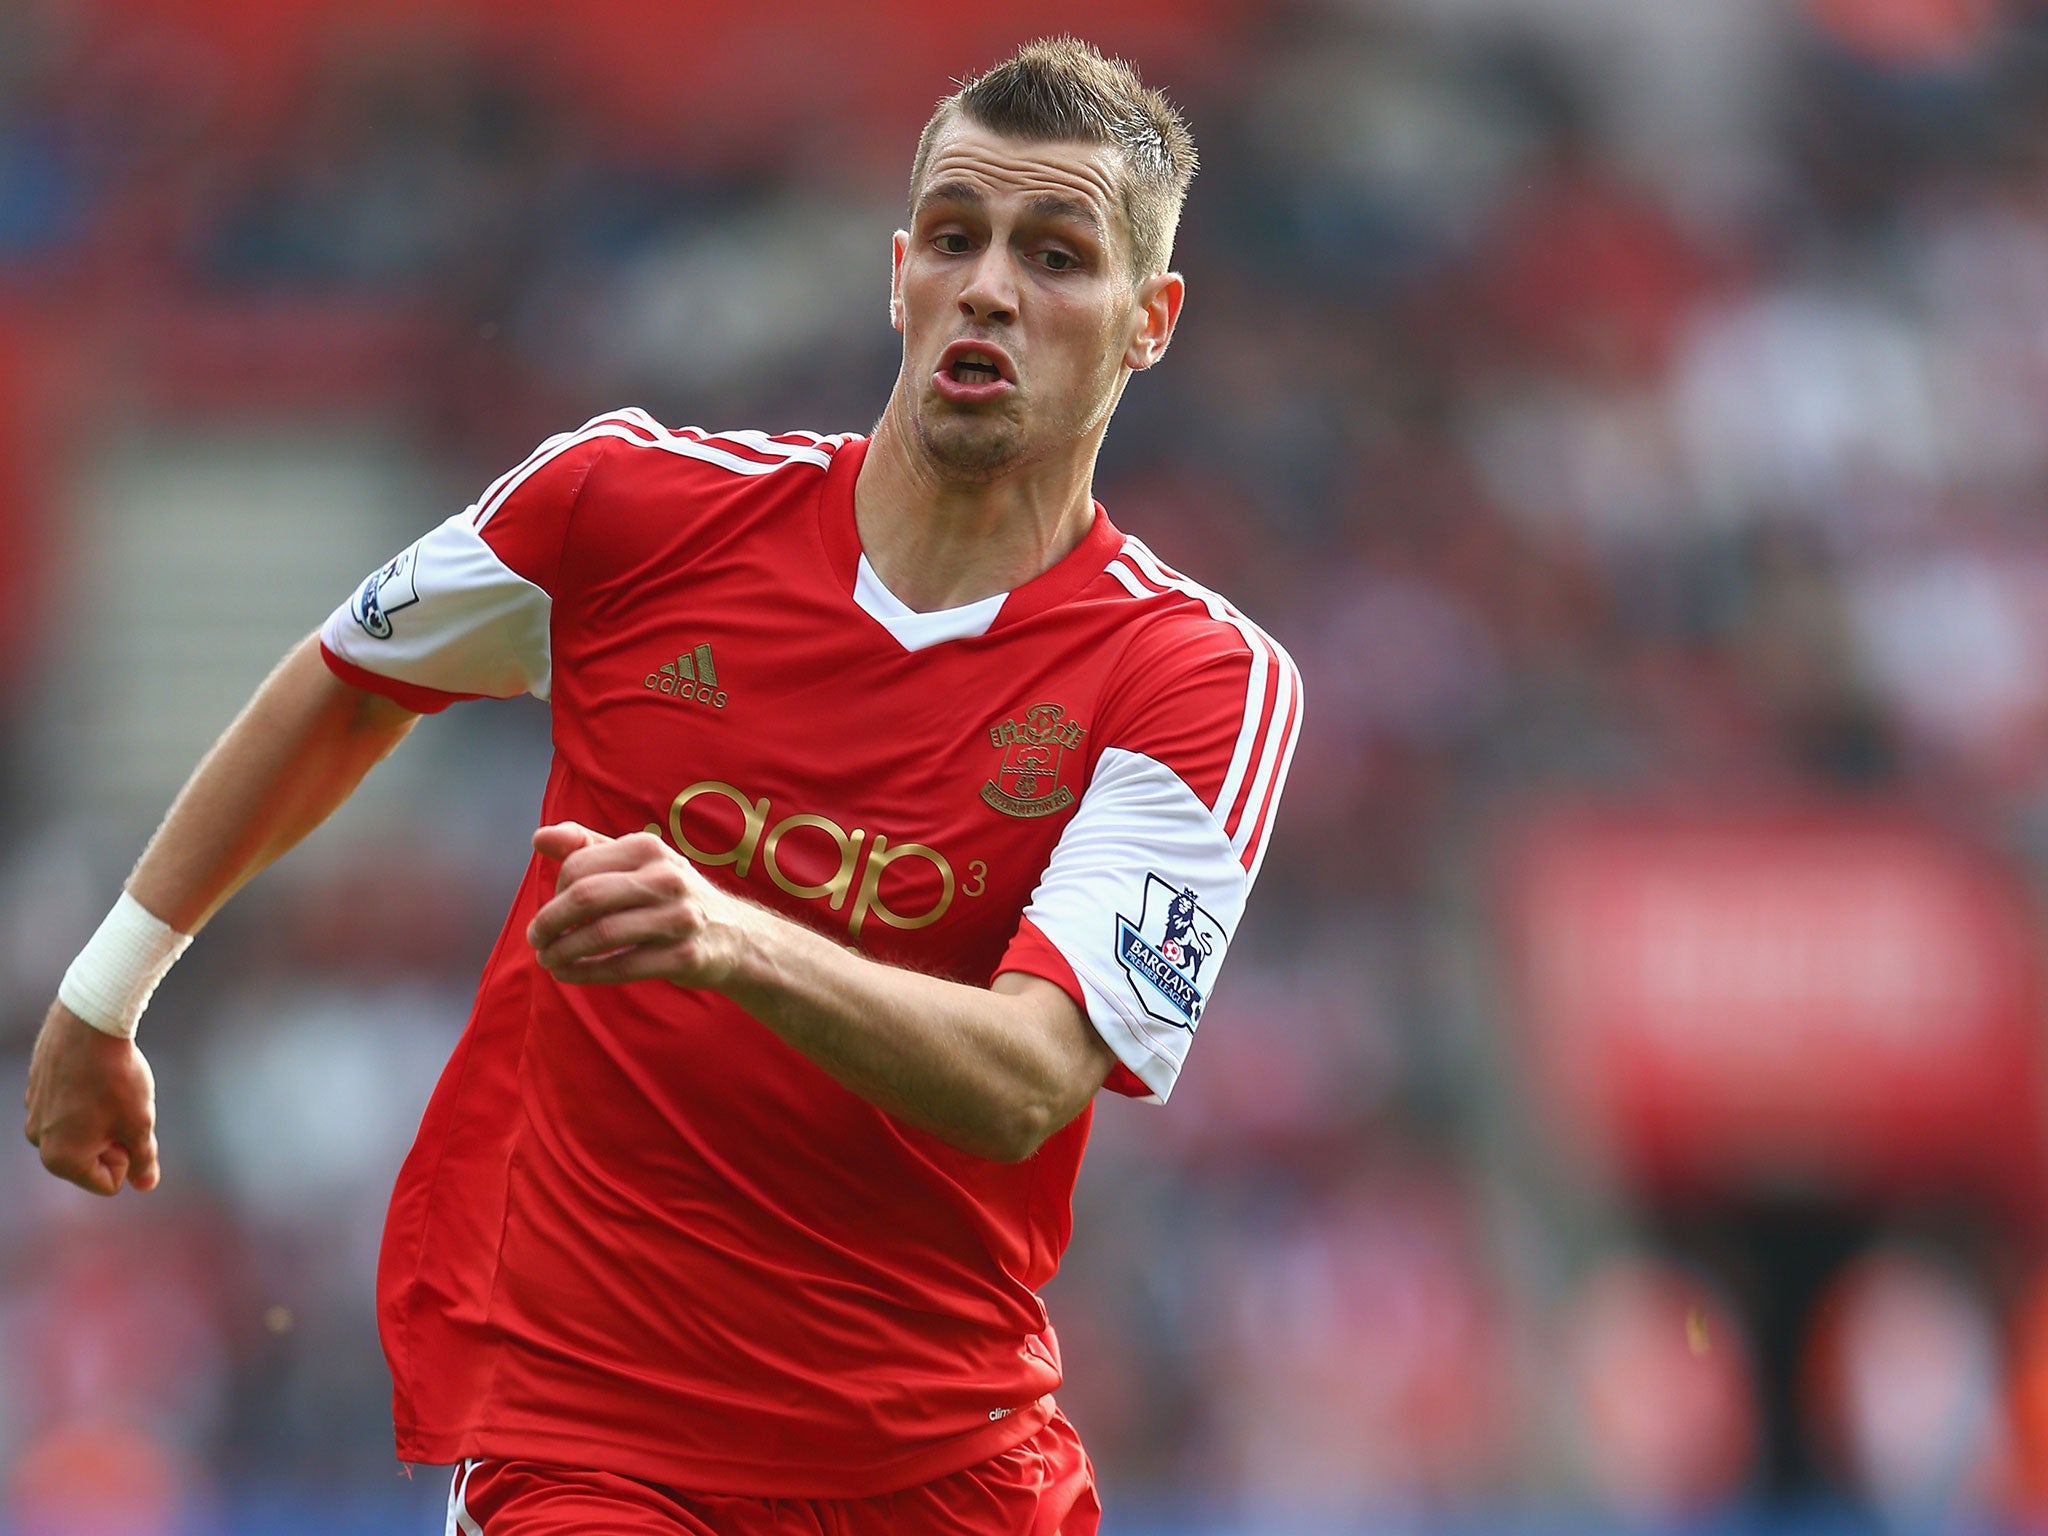 Morgan Schneiderlin is believed to have asked to
leave Southampton